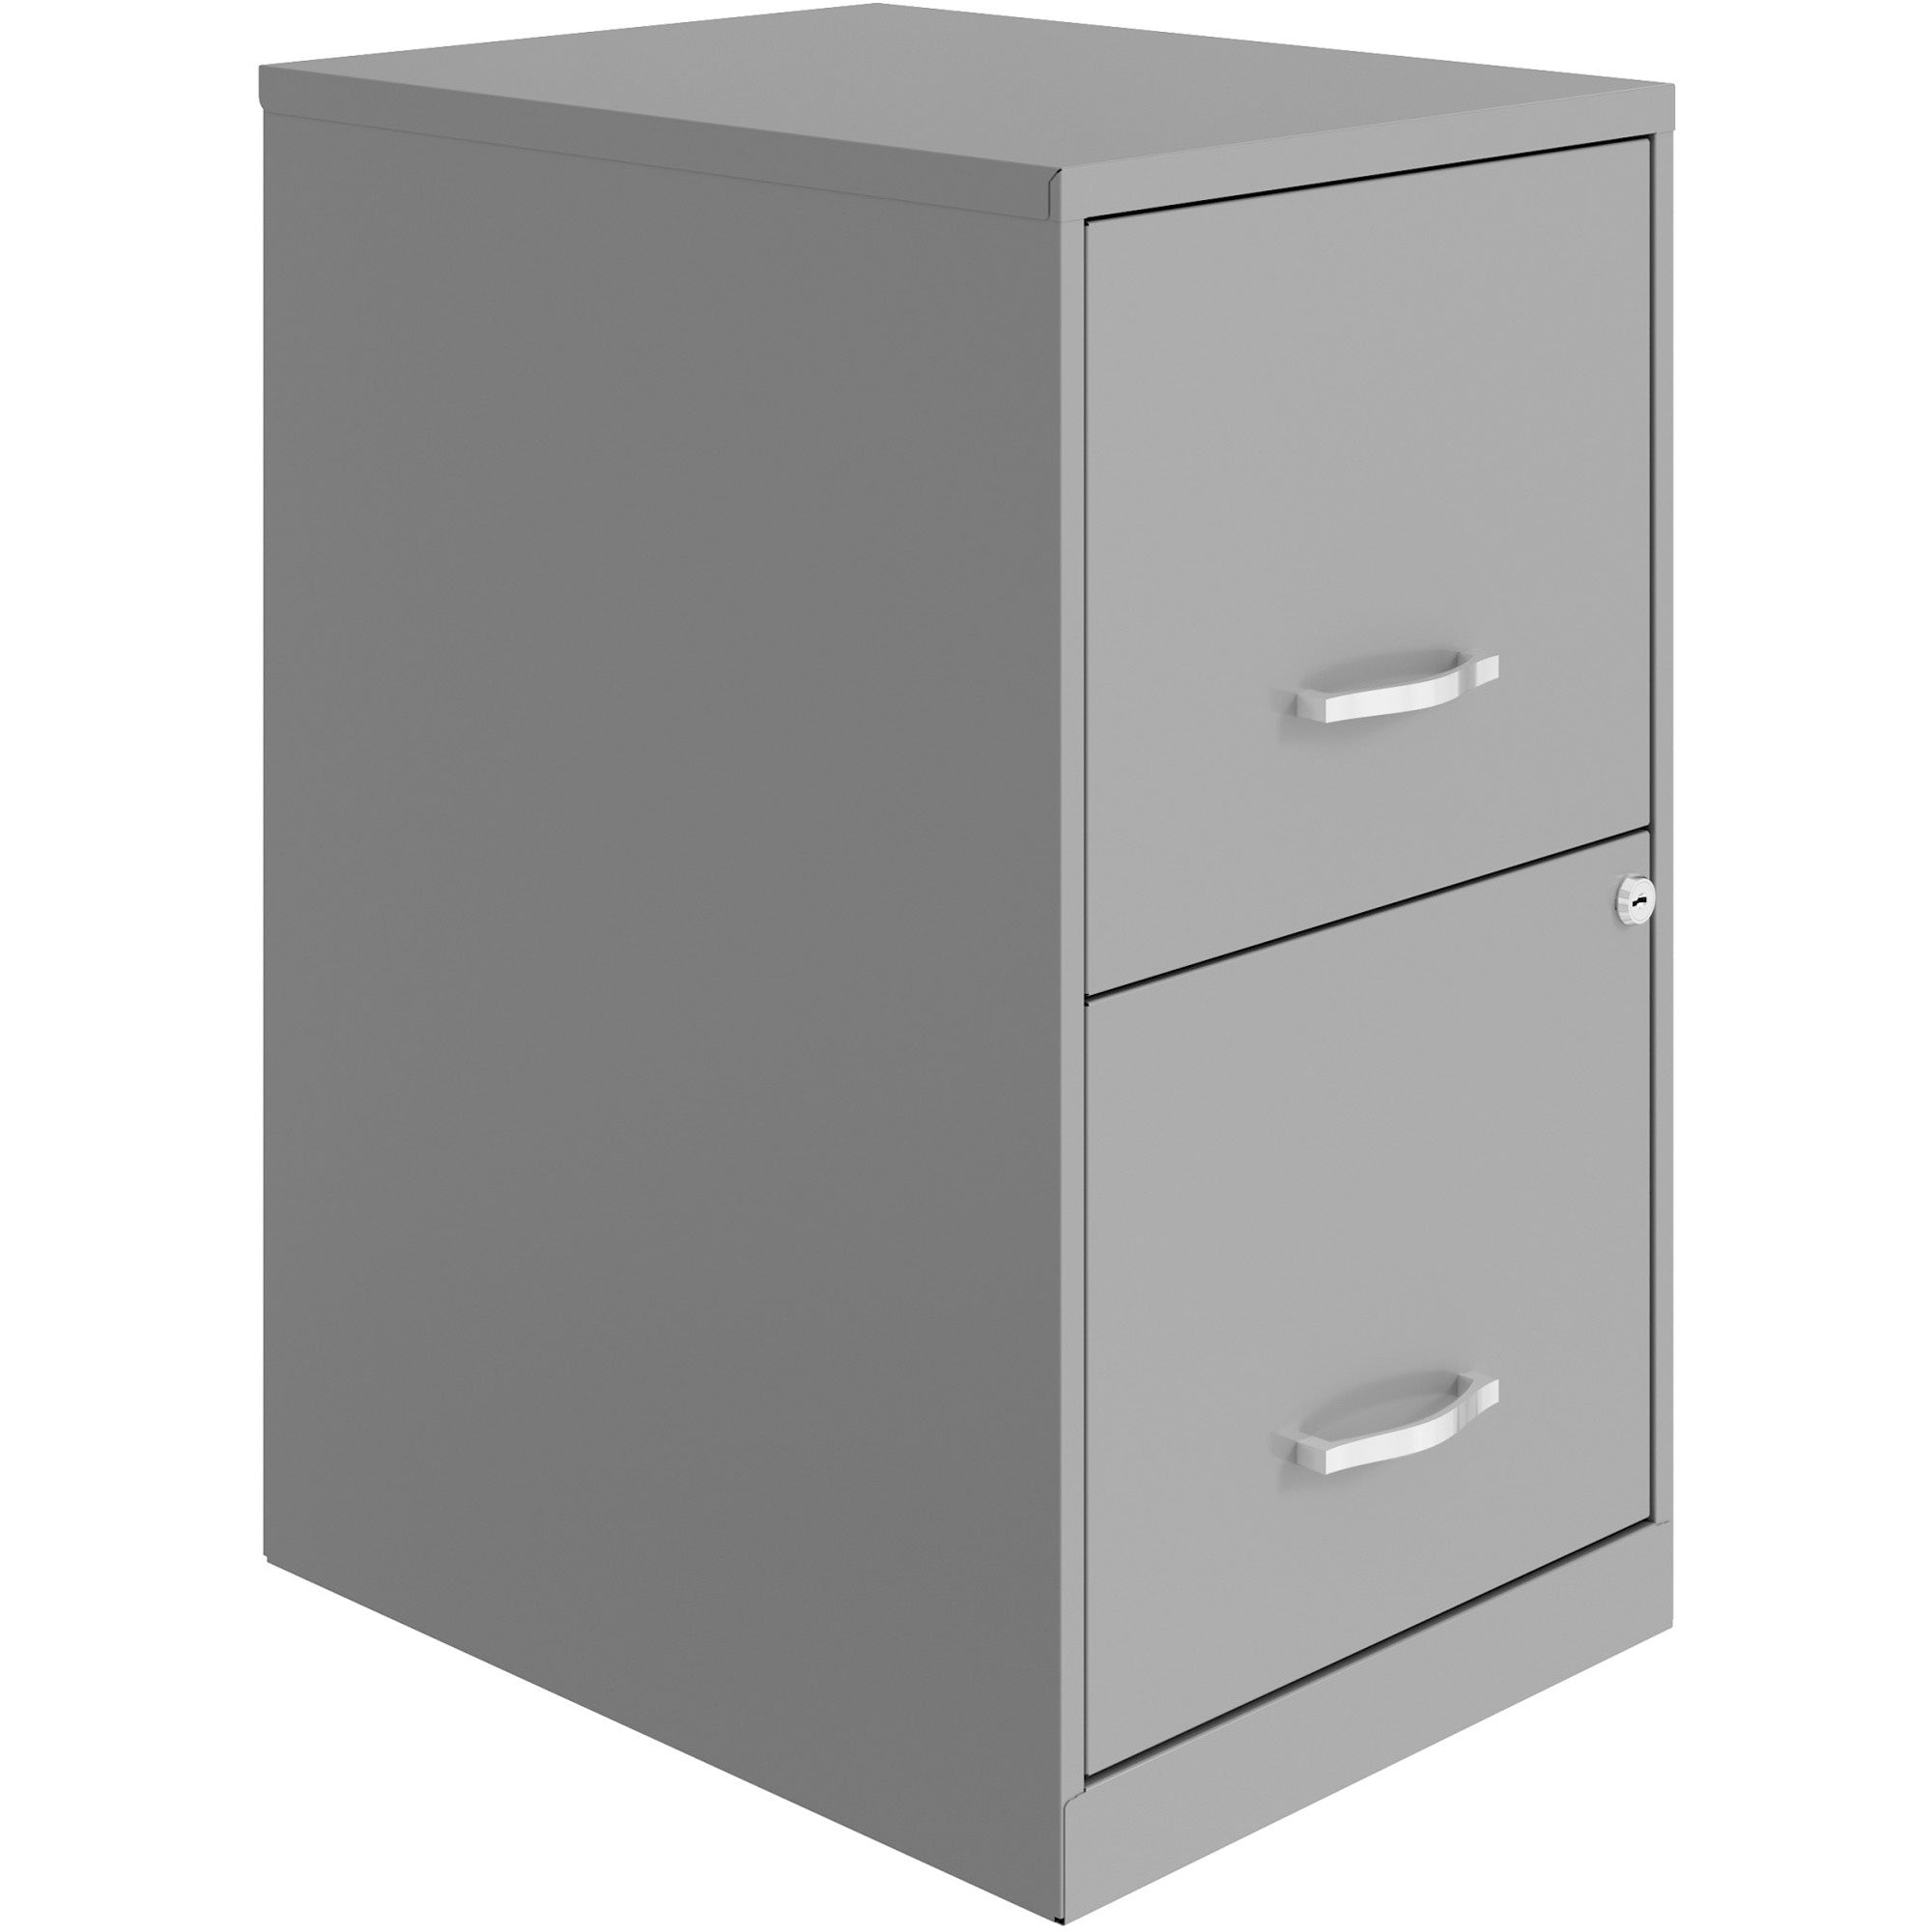 nusparc-file-cabinet-142-x-18-x-245-2-x-drawers-for-file-letter-vertical-locking-drawer-glide-suspension-nonporous-surface-silver-baked-enamel-steel-recycled_nprvf218aasr - 1